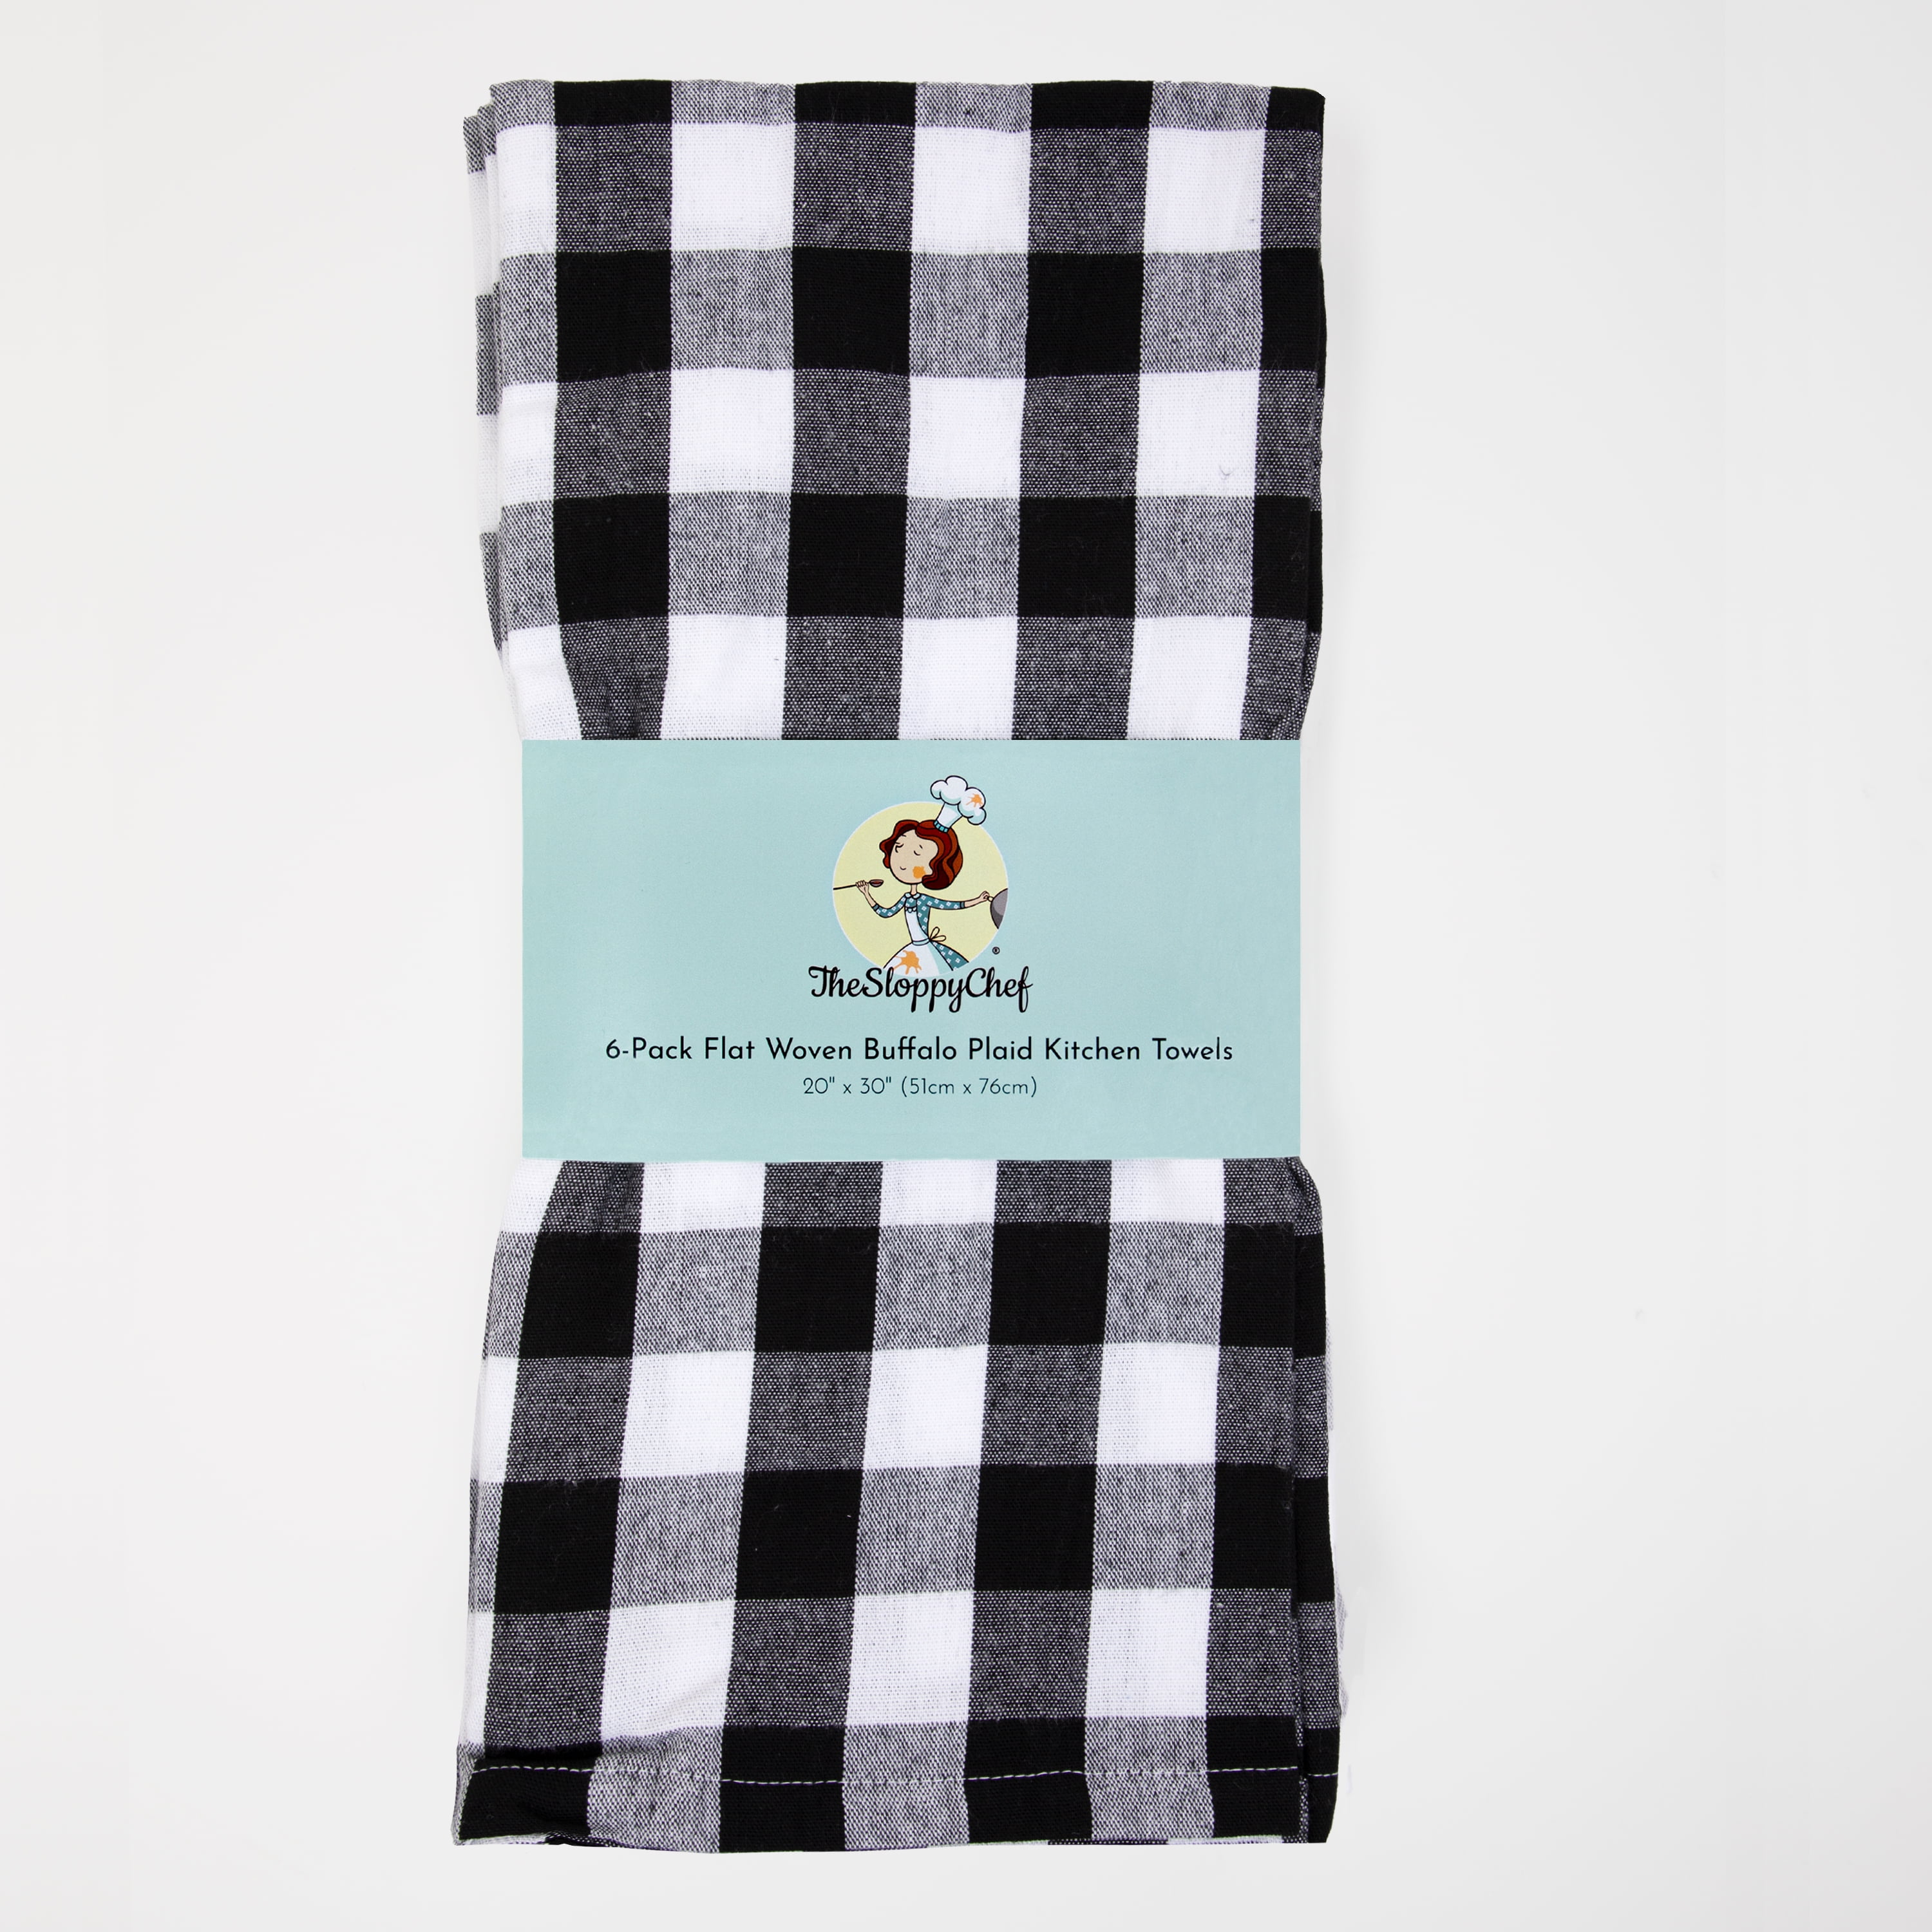  Cotton Black and White Buffalo Plaid Kitchen Towels - 12 Pack  Soft Checkered Black and White Dish Towels - Machine Washable Gingham Black  and White Hand Towels - Plaid Dish Cloths 